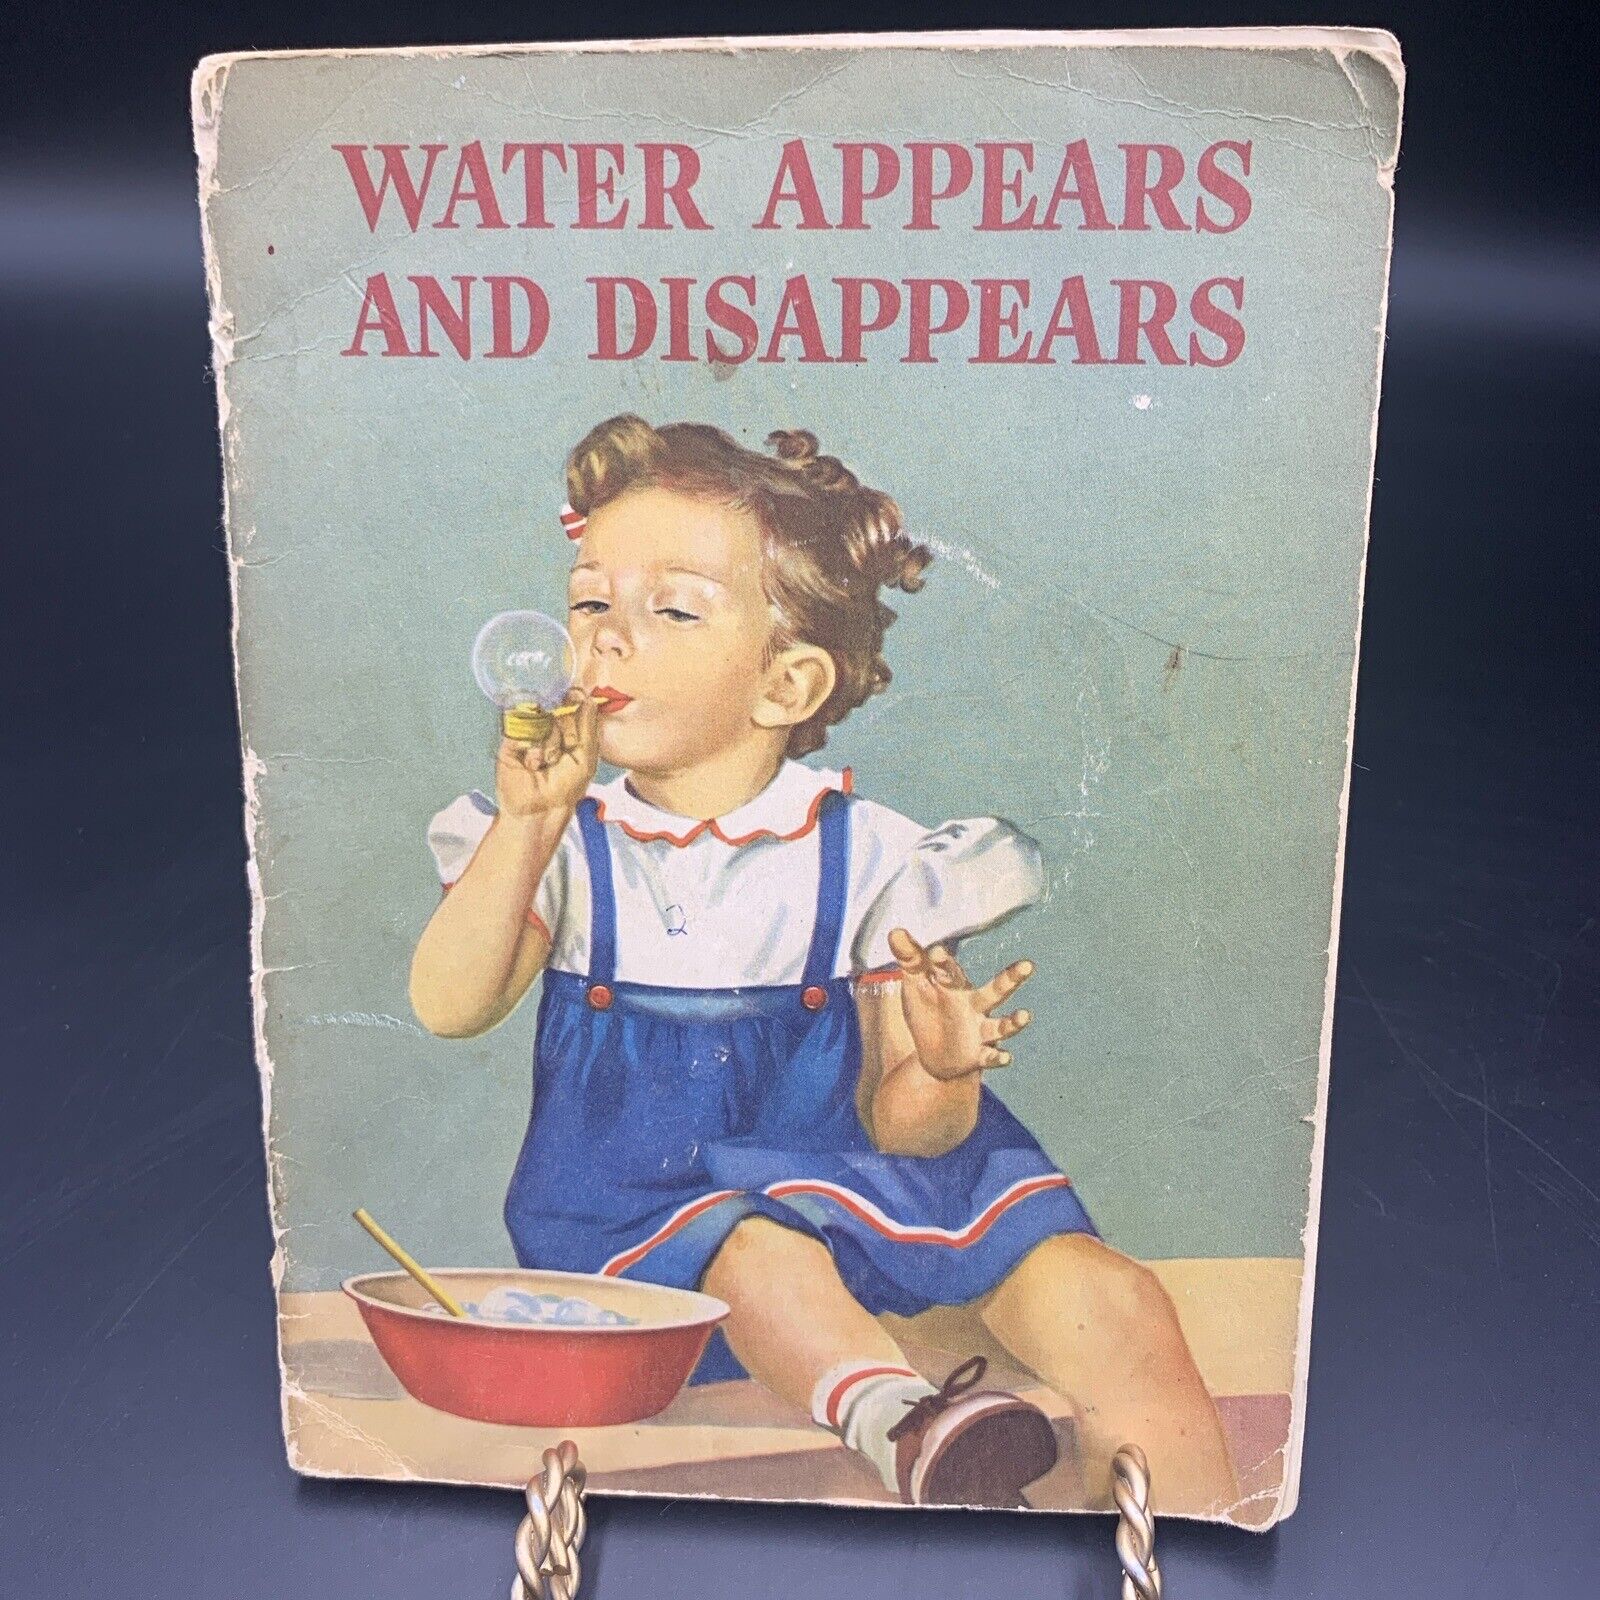 Vintage 1953 Edition Water Appears and Disappears by Glenn O. Blough